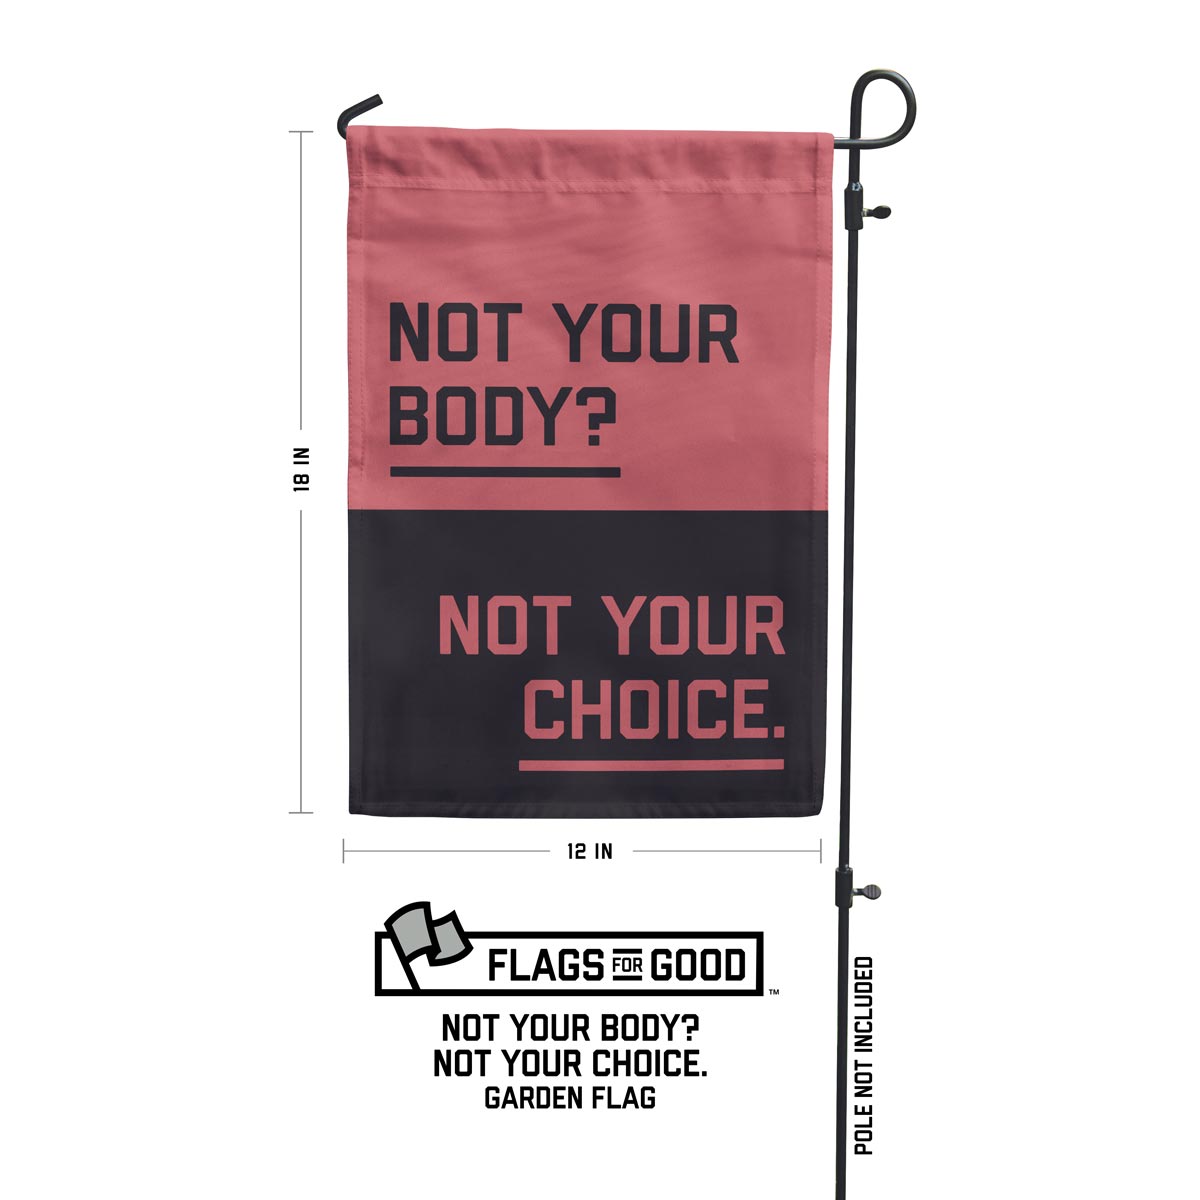 &quot;Not your body? Not your choice.&quot; garden flag measurements of 12 by 18 inches. Flag pole not included